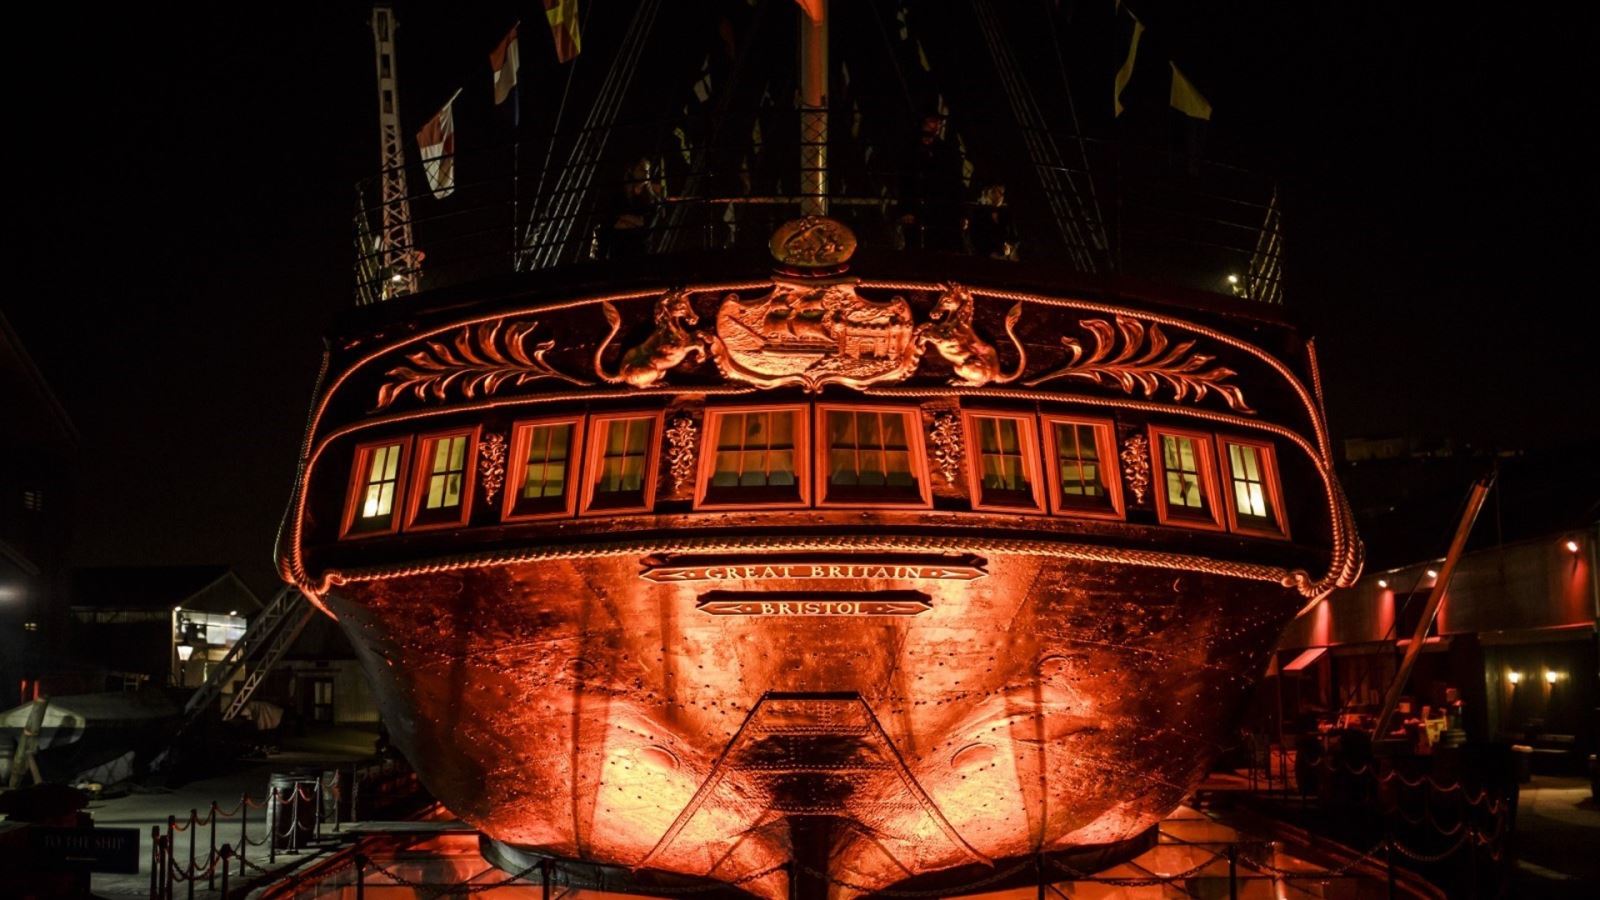 The SS Great Britain embraces her spooky side this Halloween